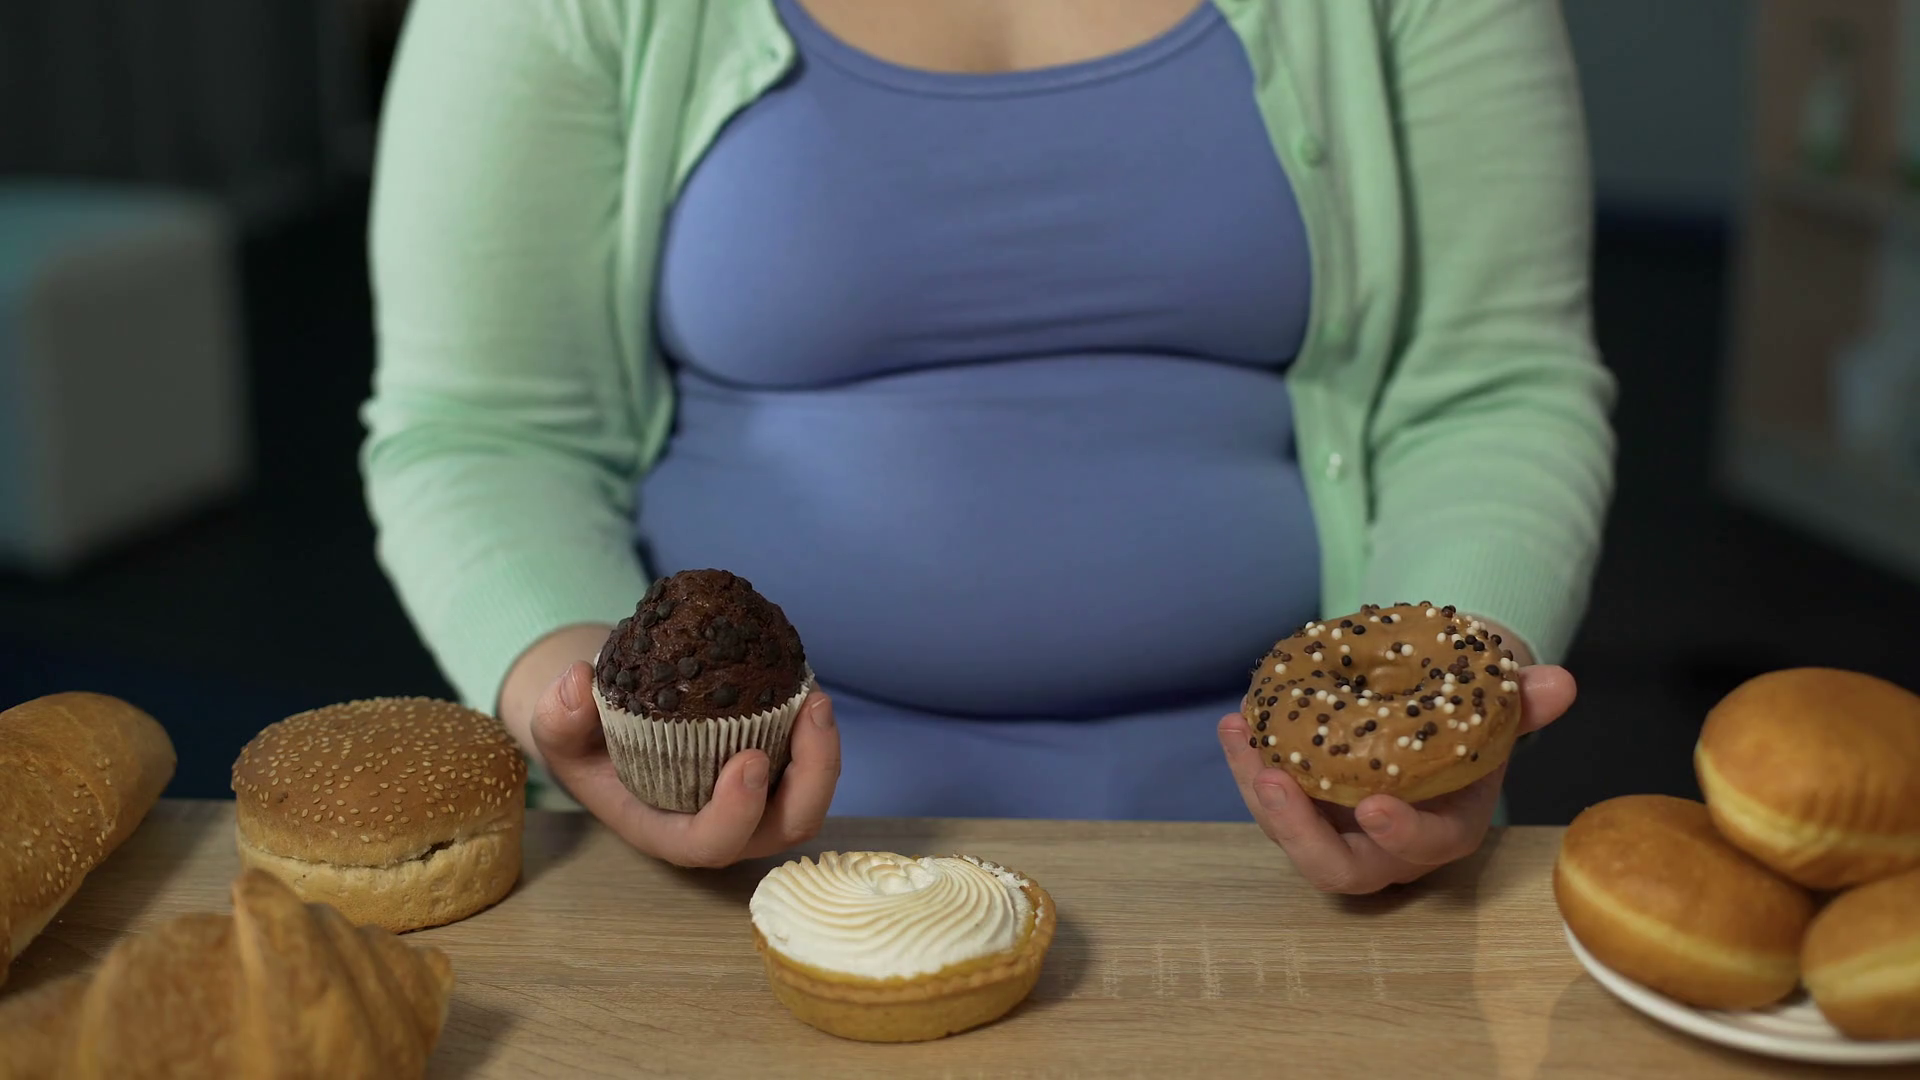 Obese teenager biting muffins and donuts, overeating sweets ...